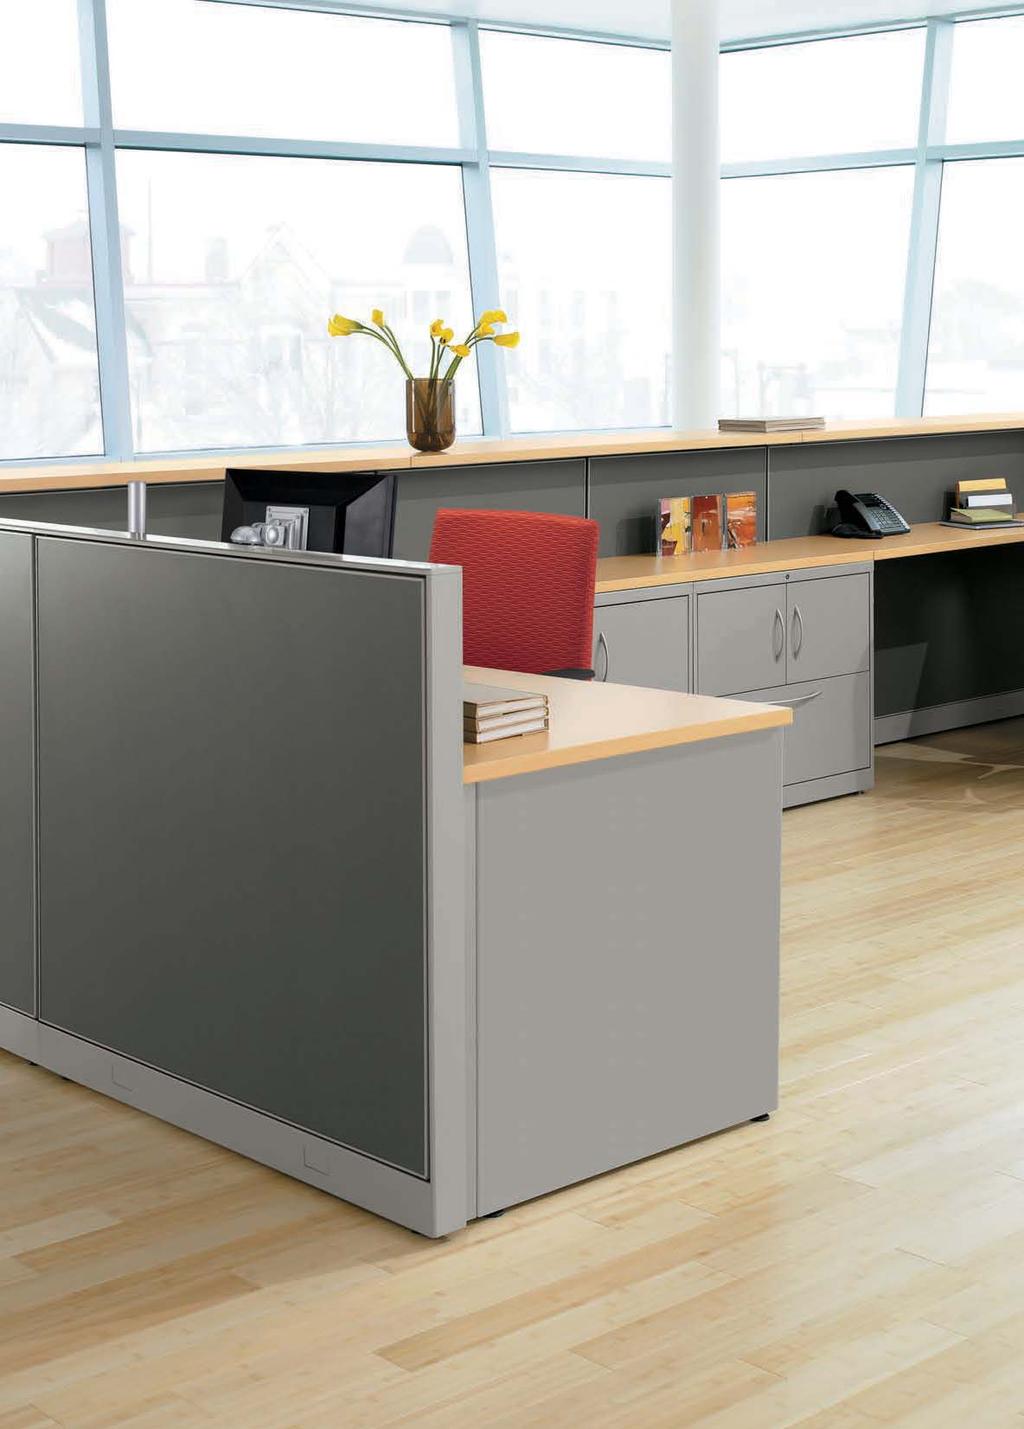 SOLID STRUCTURE The appearance of Abound workstations may catch the eye, but even more attractive is what lies beneath exacting construction and sturdy materials that ensure